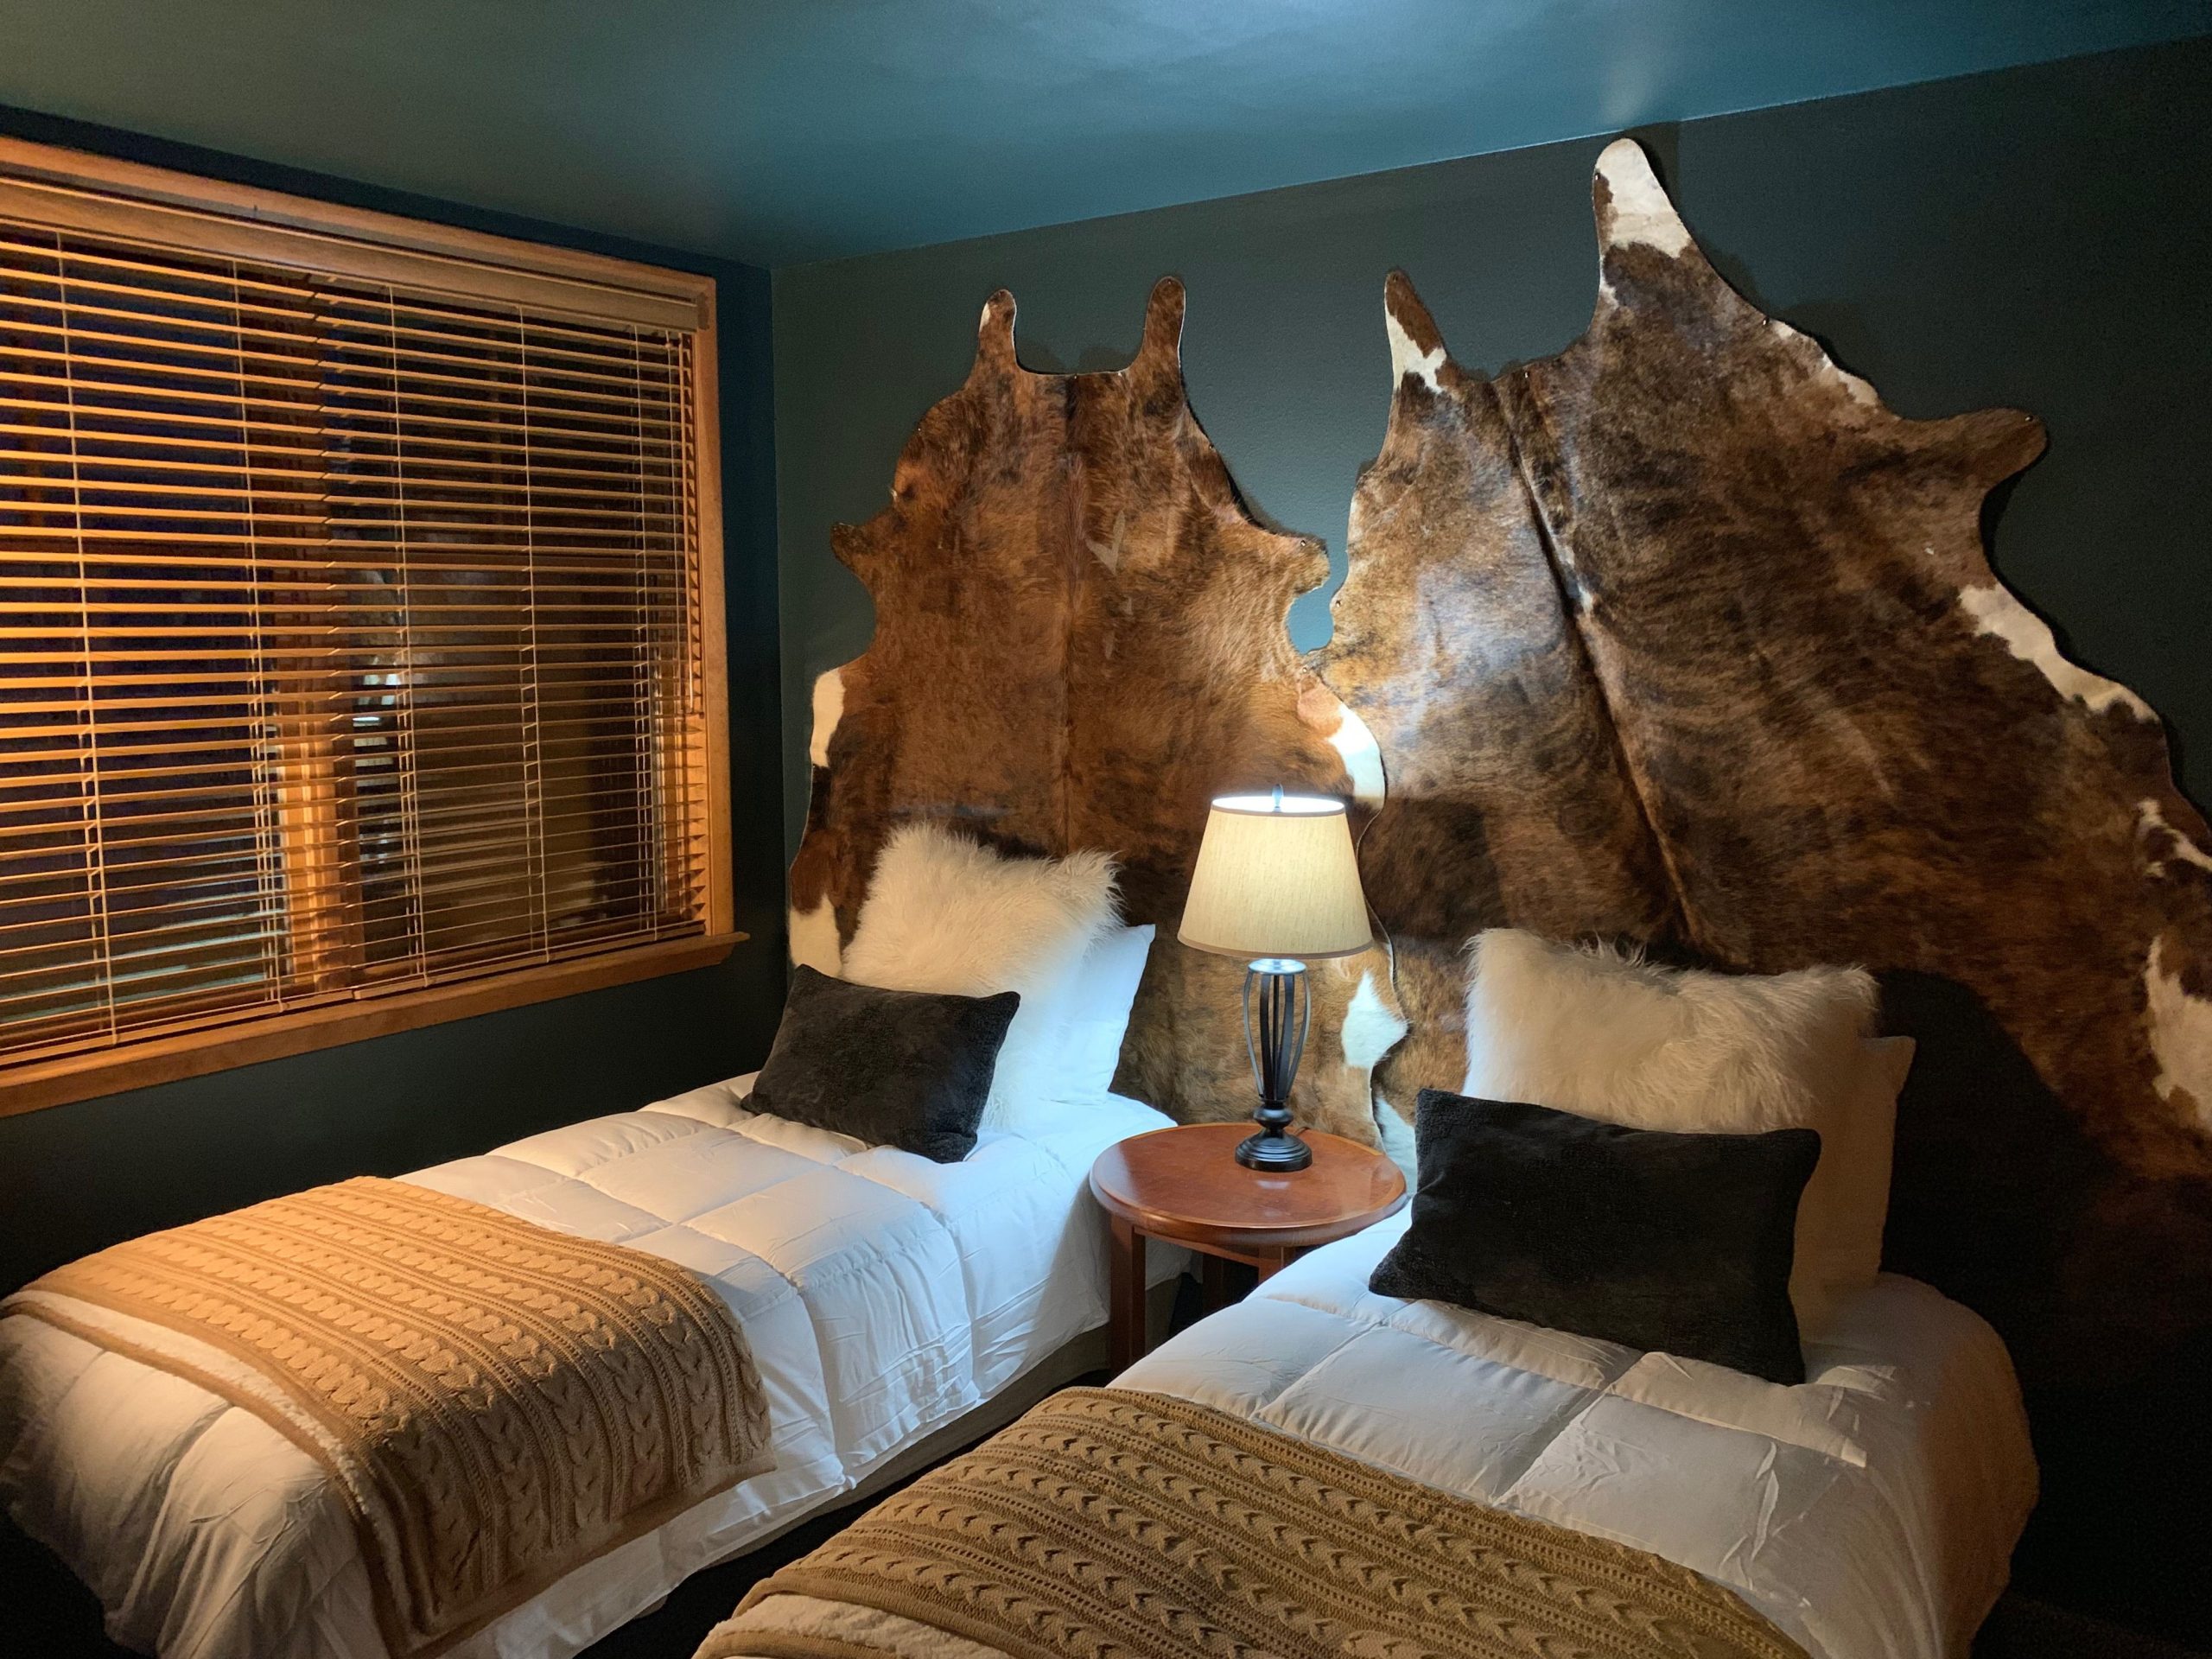 How to Hang a Cowhide on the Wall